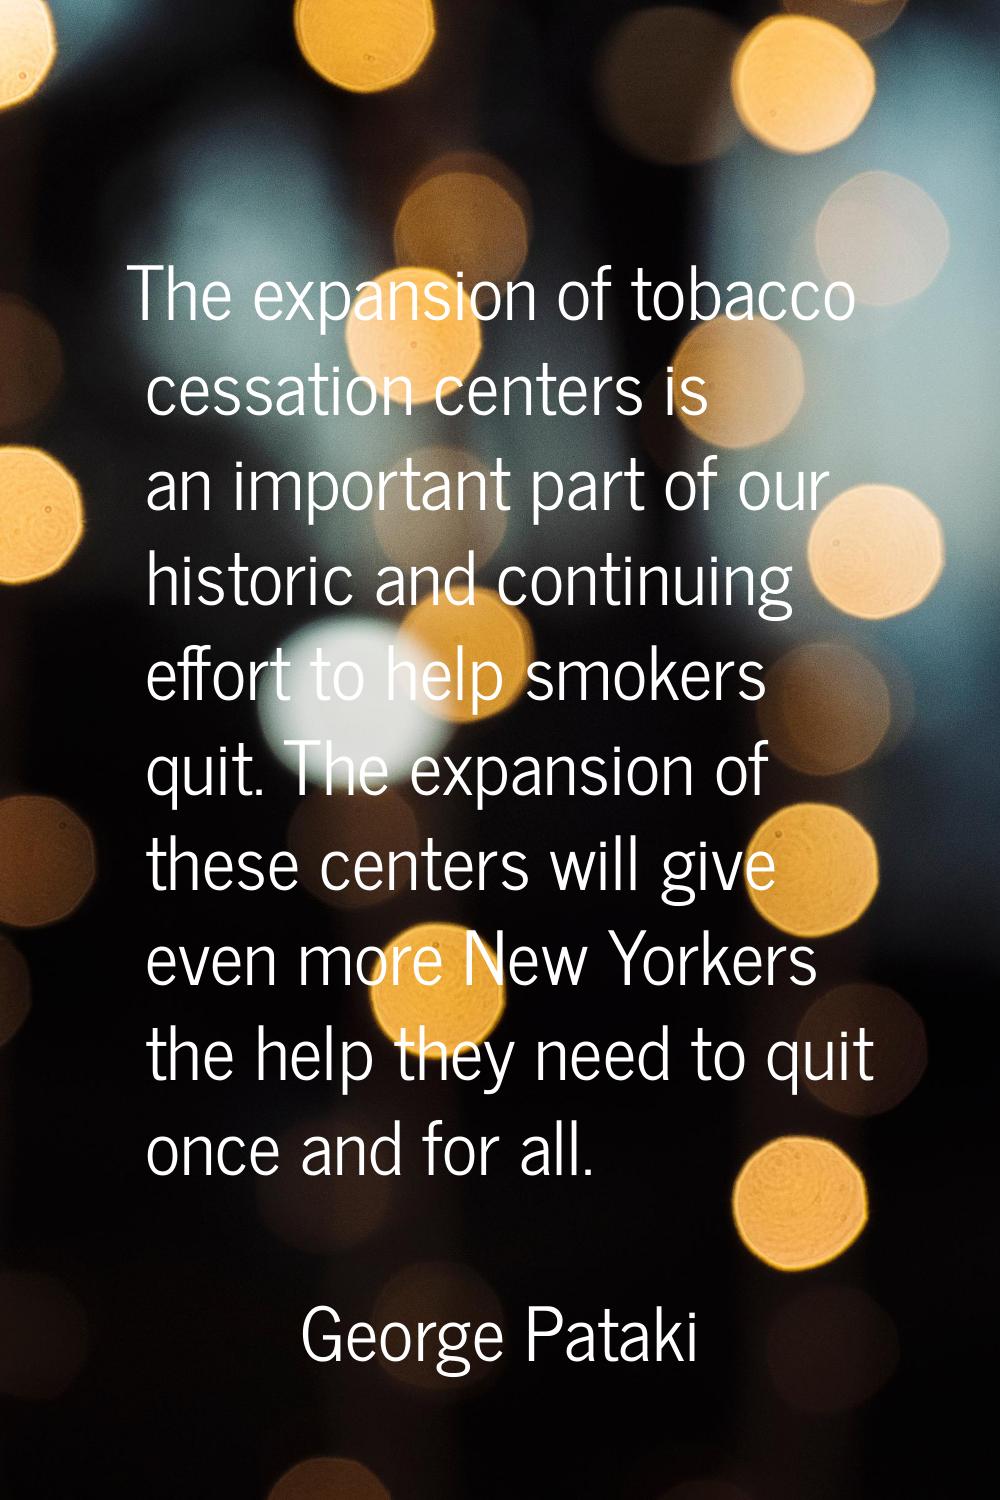 The expansion of tobacco cessation centers is an important part of our historic and continuing effo